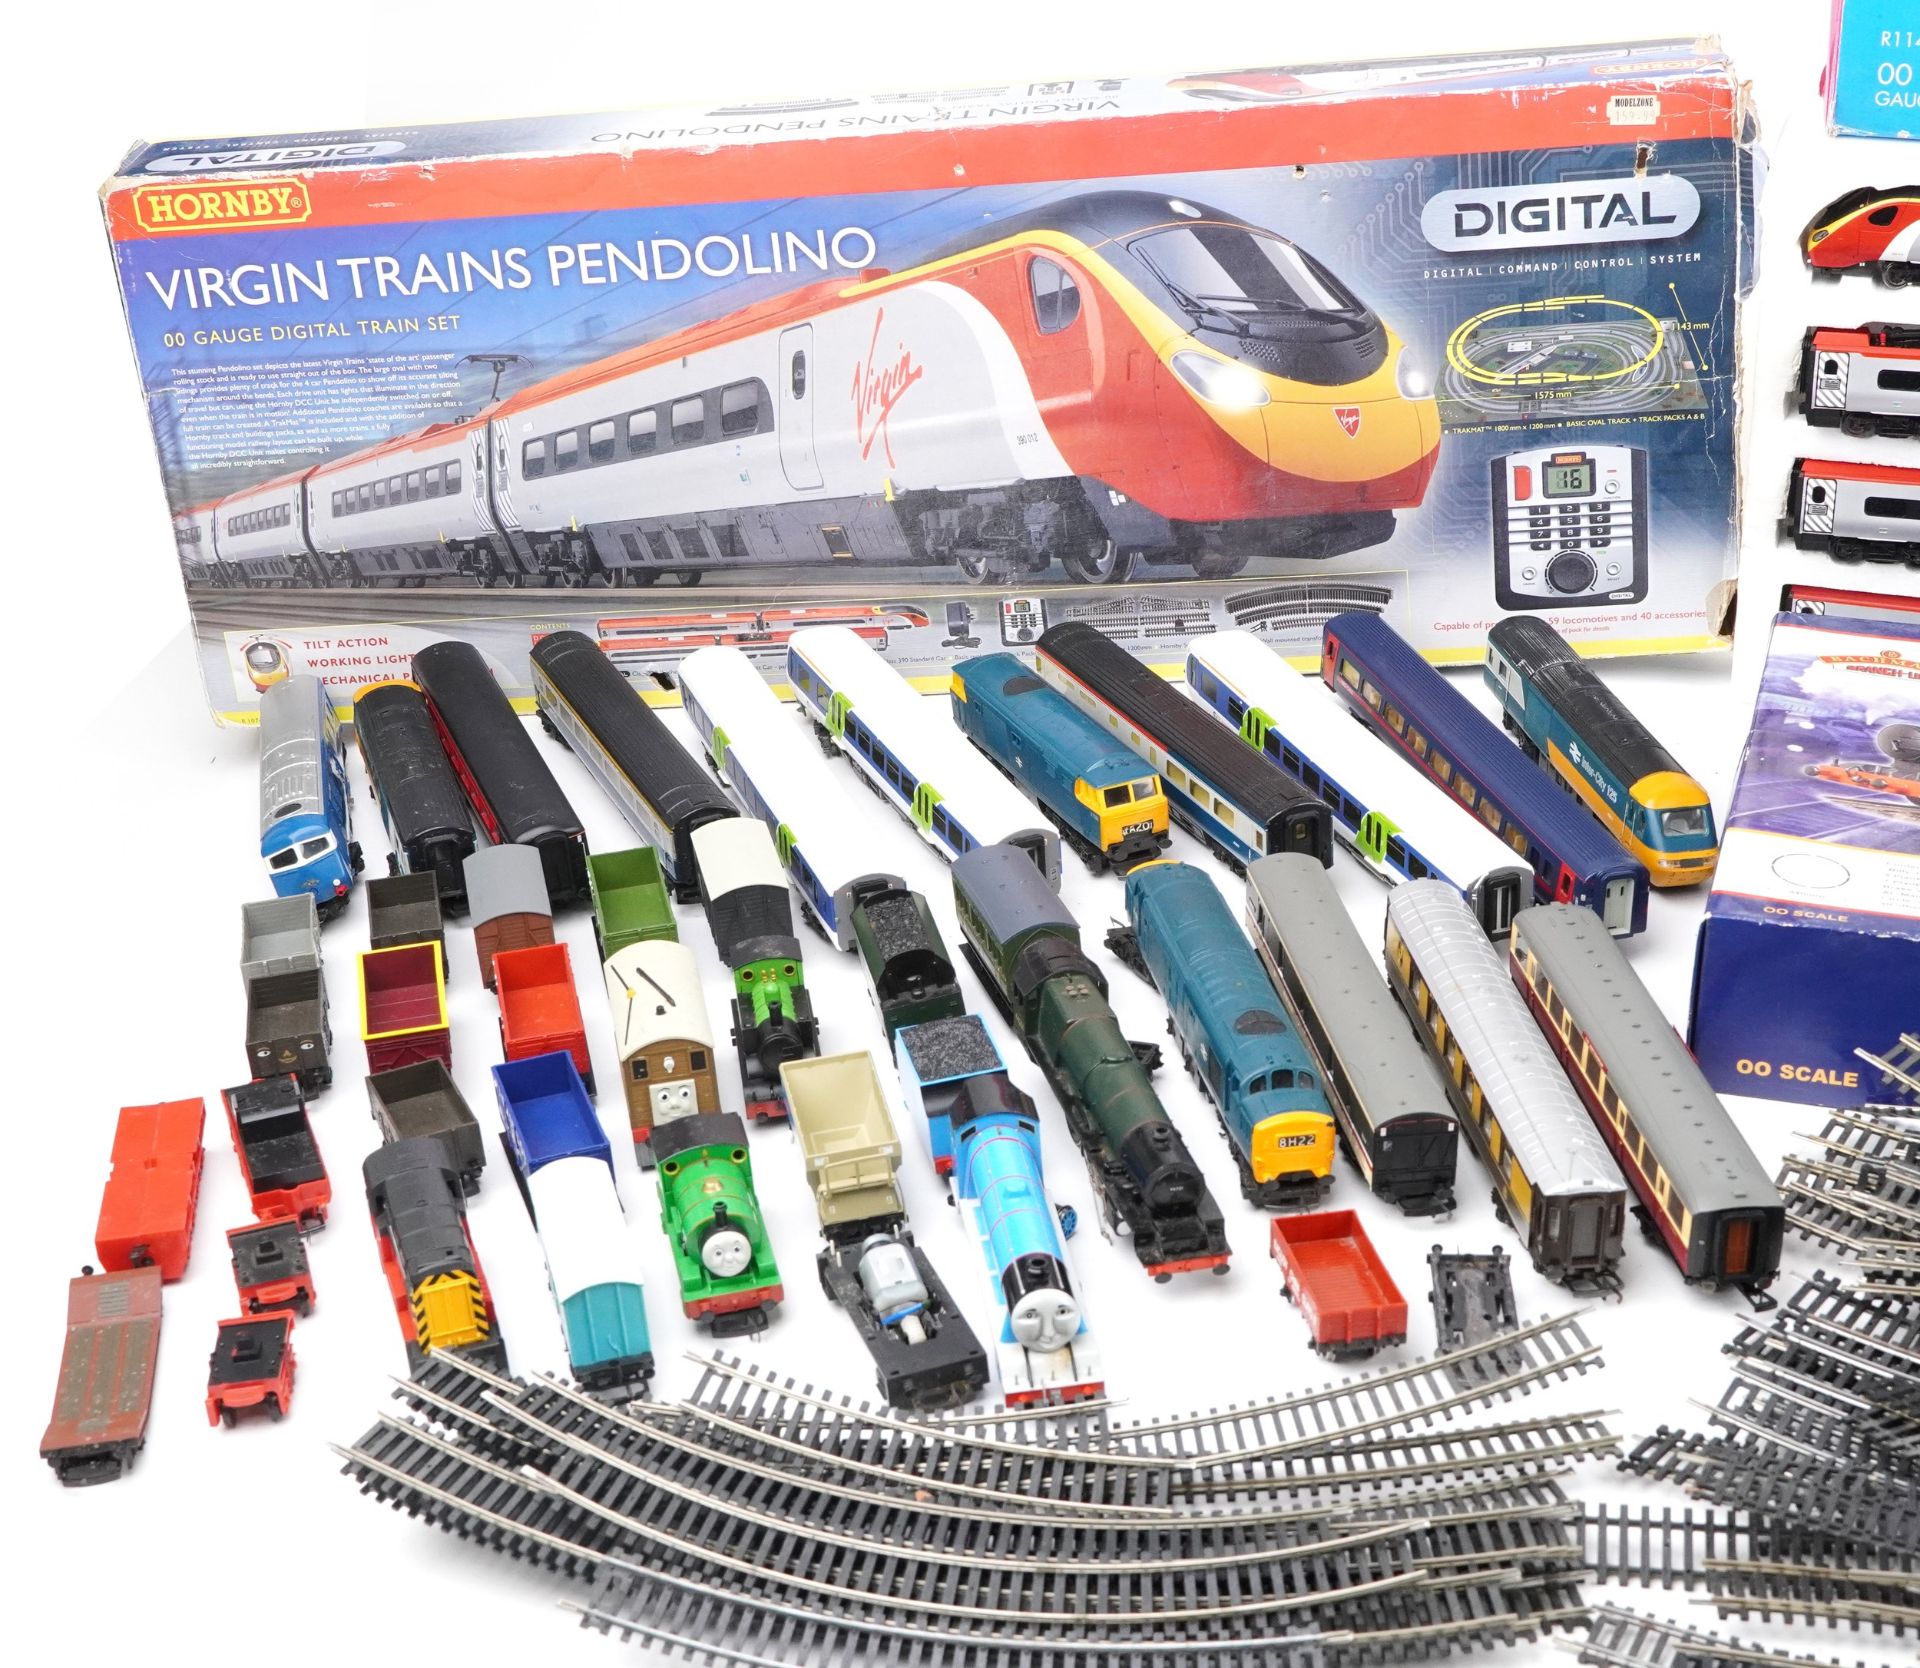 OO gauge model railway, some with boxes including London 2012, Virgin Trains Pendolino and Eurostar, - Bild 2 aus 7